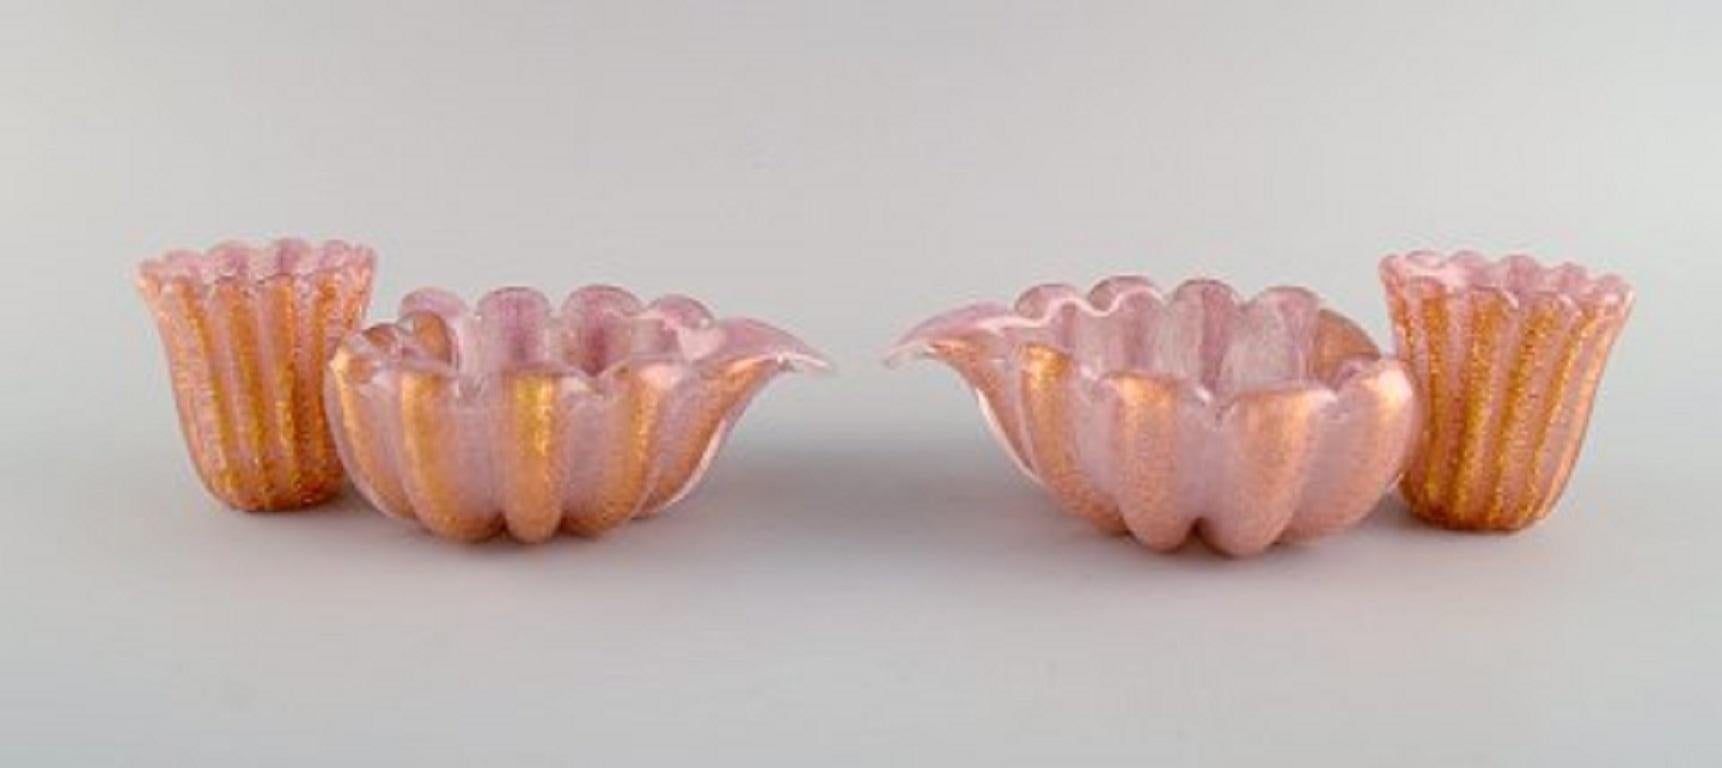 Barovier and Toso, Venice. A pair of organically shaped bowls in pink mouth-blown art glass.
Italian design, 1960s.
Measures: 21 x 7 cm
In excellent condition.